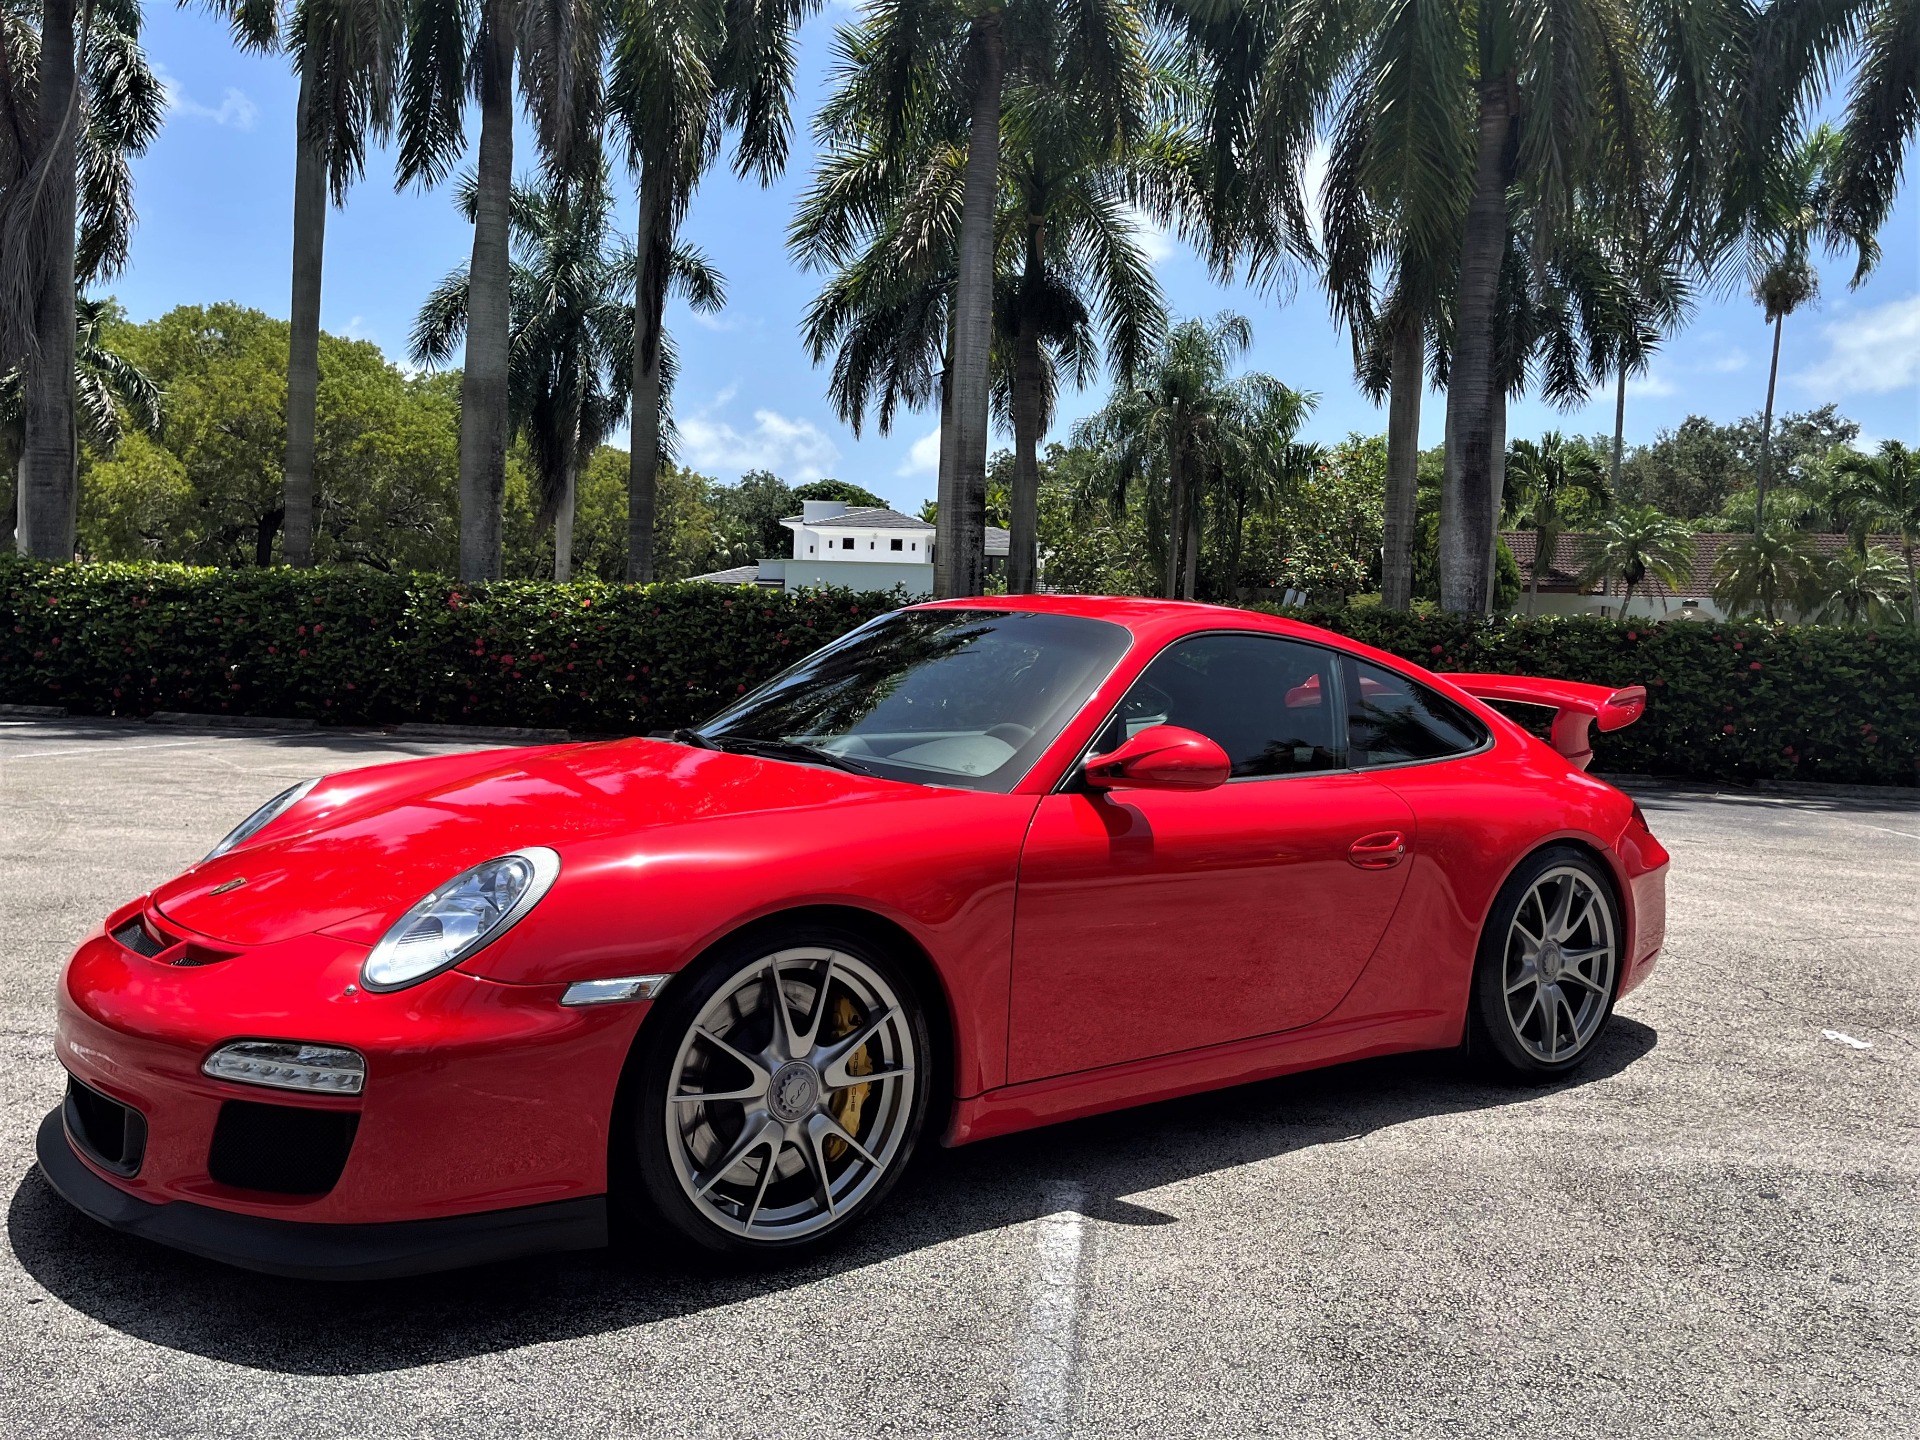 Used 2010 Porsche 911 GT3 for sale Sold at The Gables Sports Cars in Miami FL 33146 3